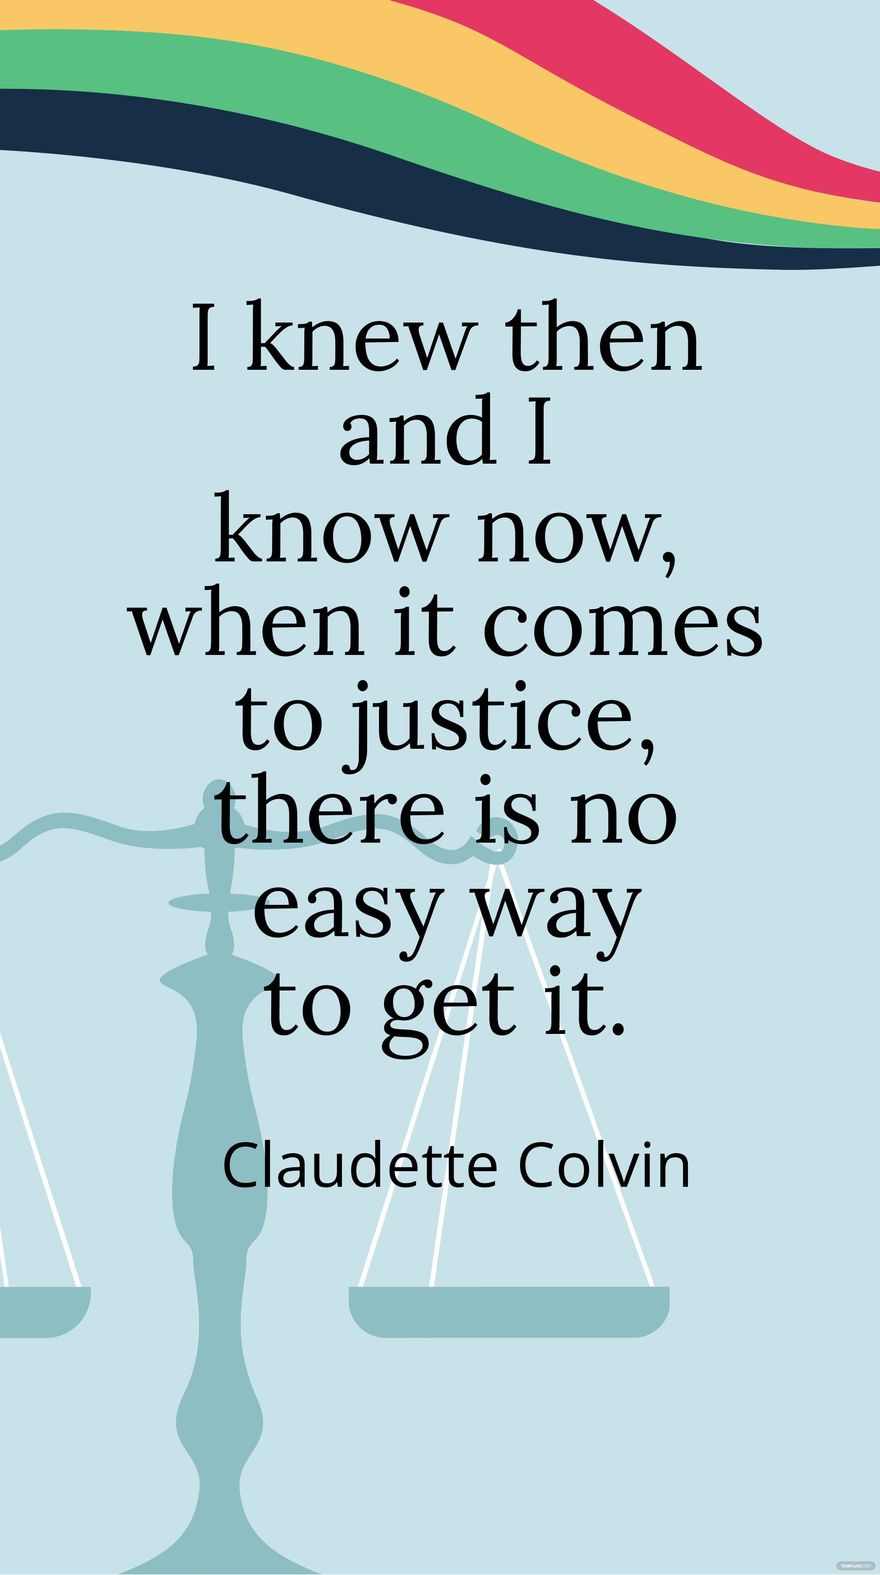 Claudette Colvin - I knew then and I know now, when it comes to justice, there is no easy way to get it.